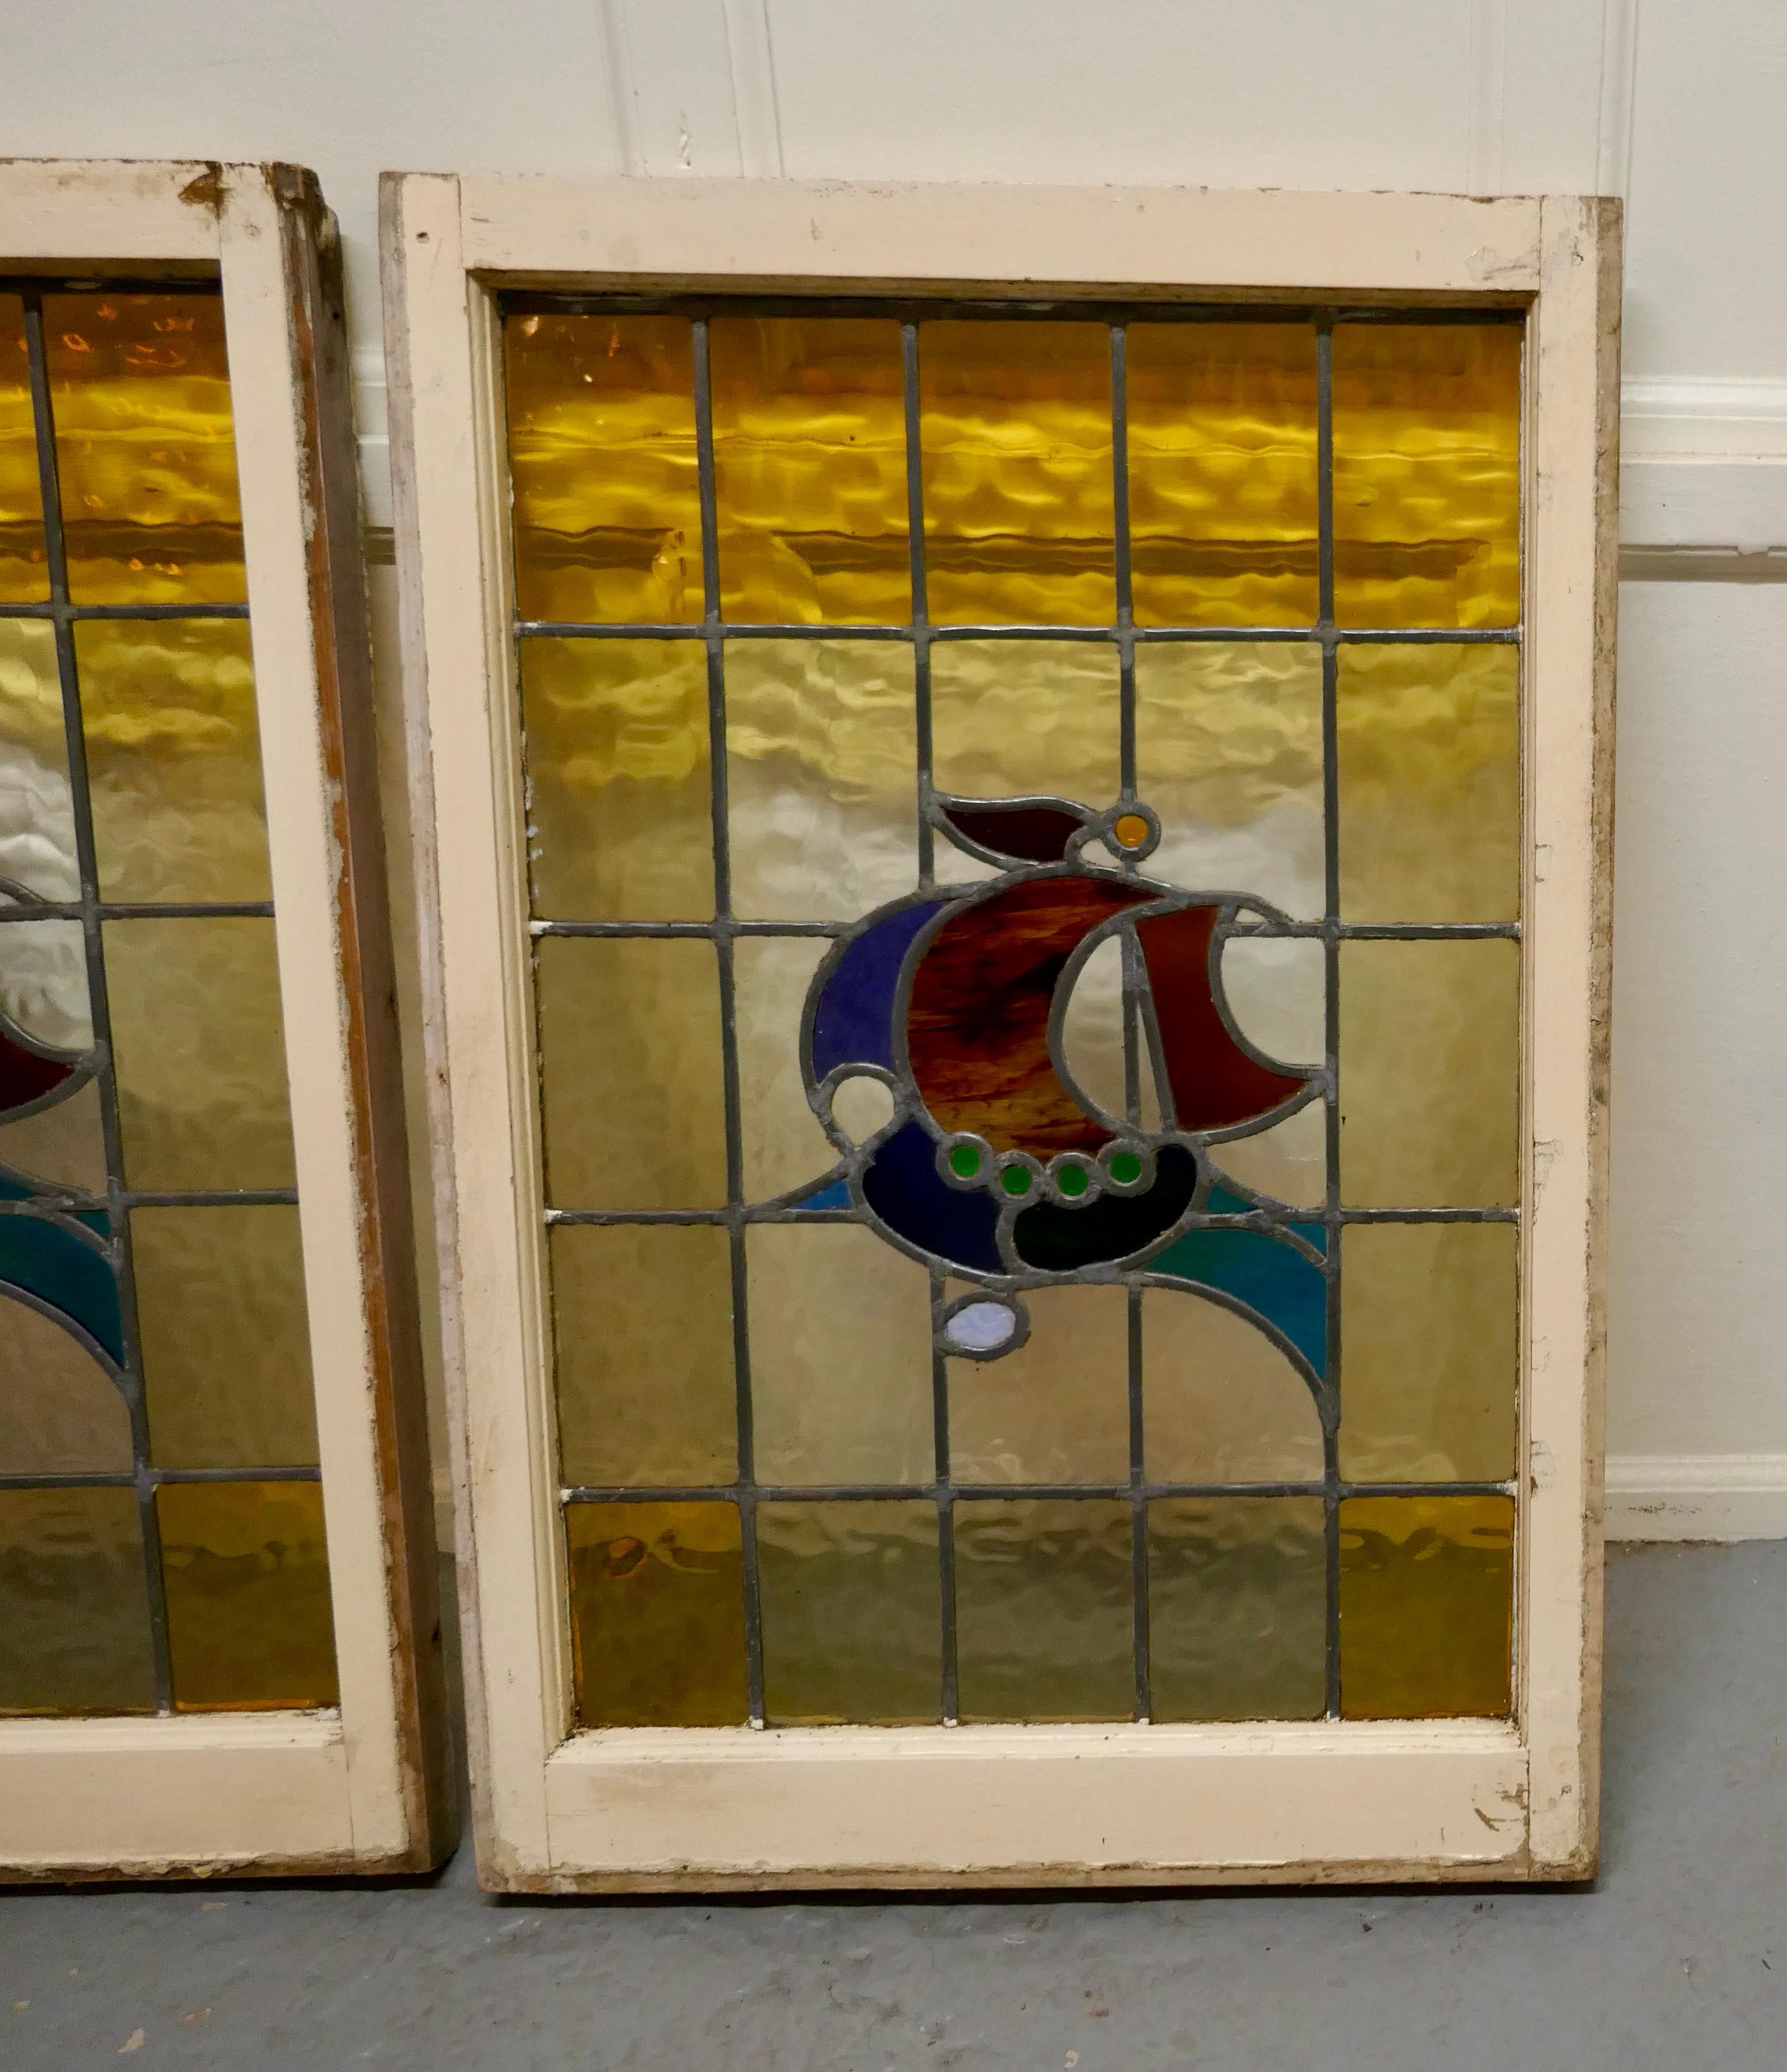 Pair of 19th century Art Nouveau stained glass windows, with ships

These are a pretty and very colorful Art Nouveau style windows, both jewelled and stained glass
The windows are in their original frames these are is in their old cream